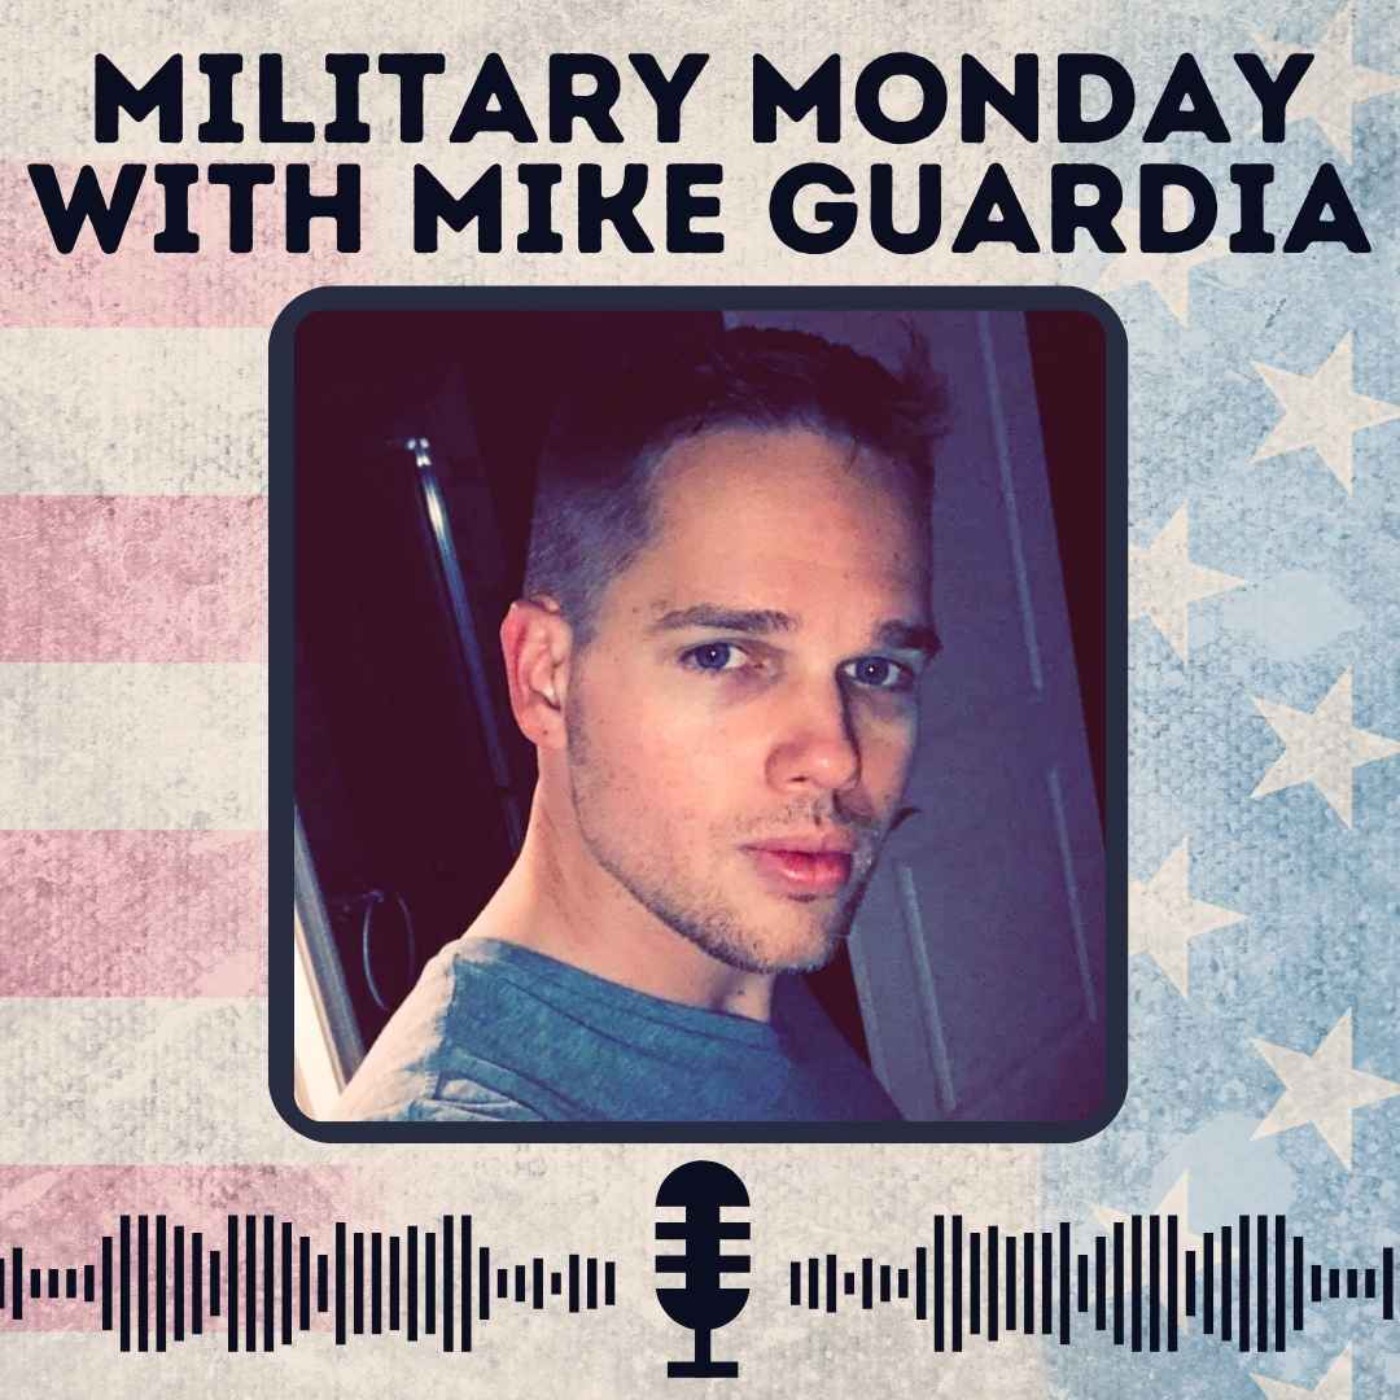 Military Monday with Mike Guardia